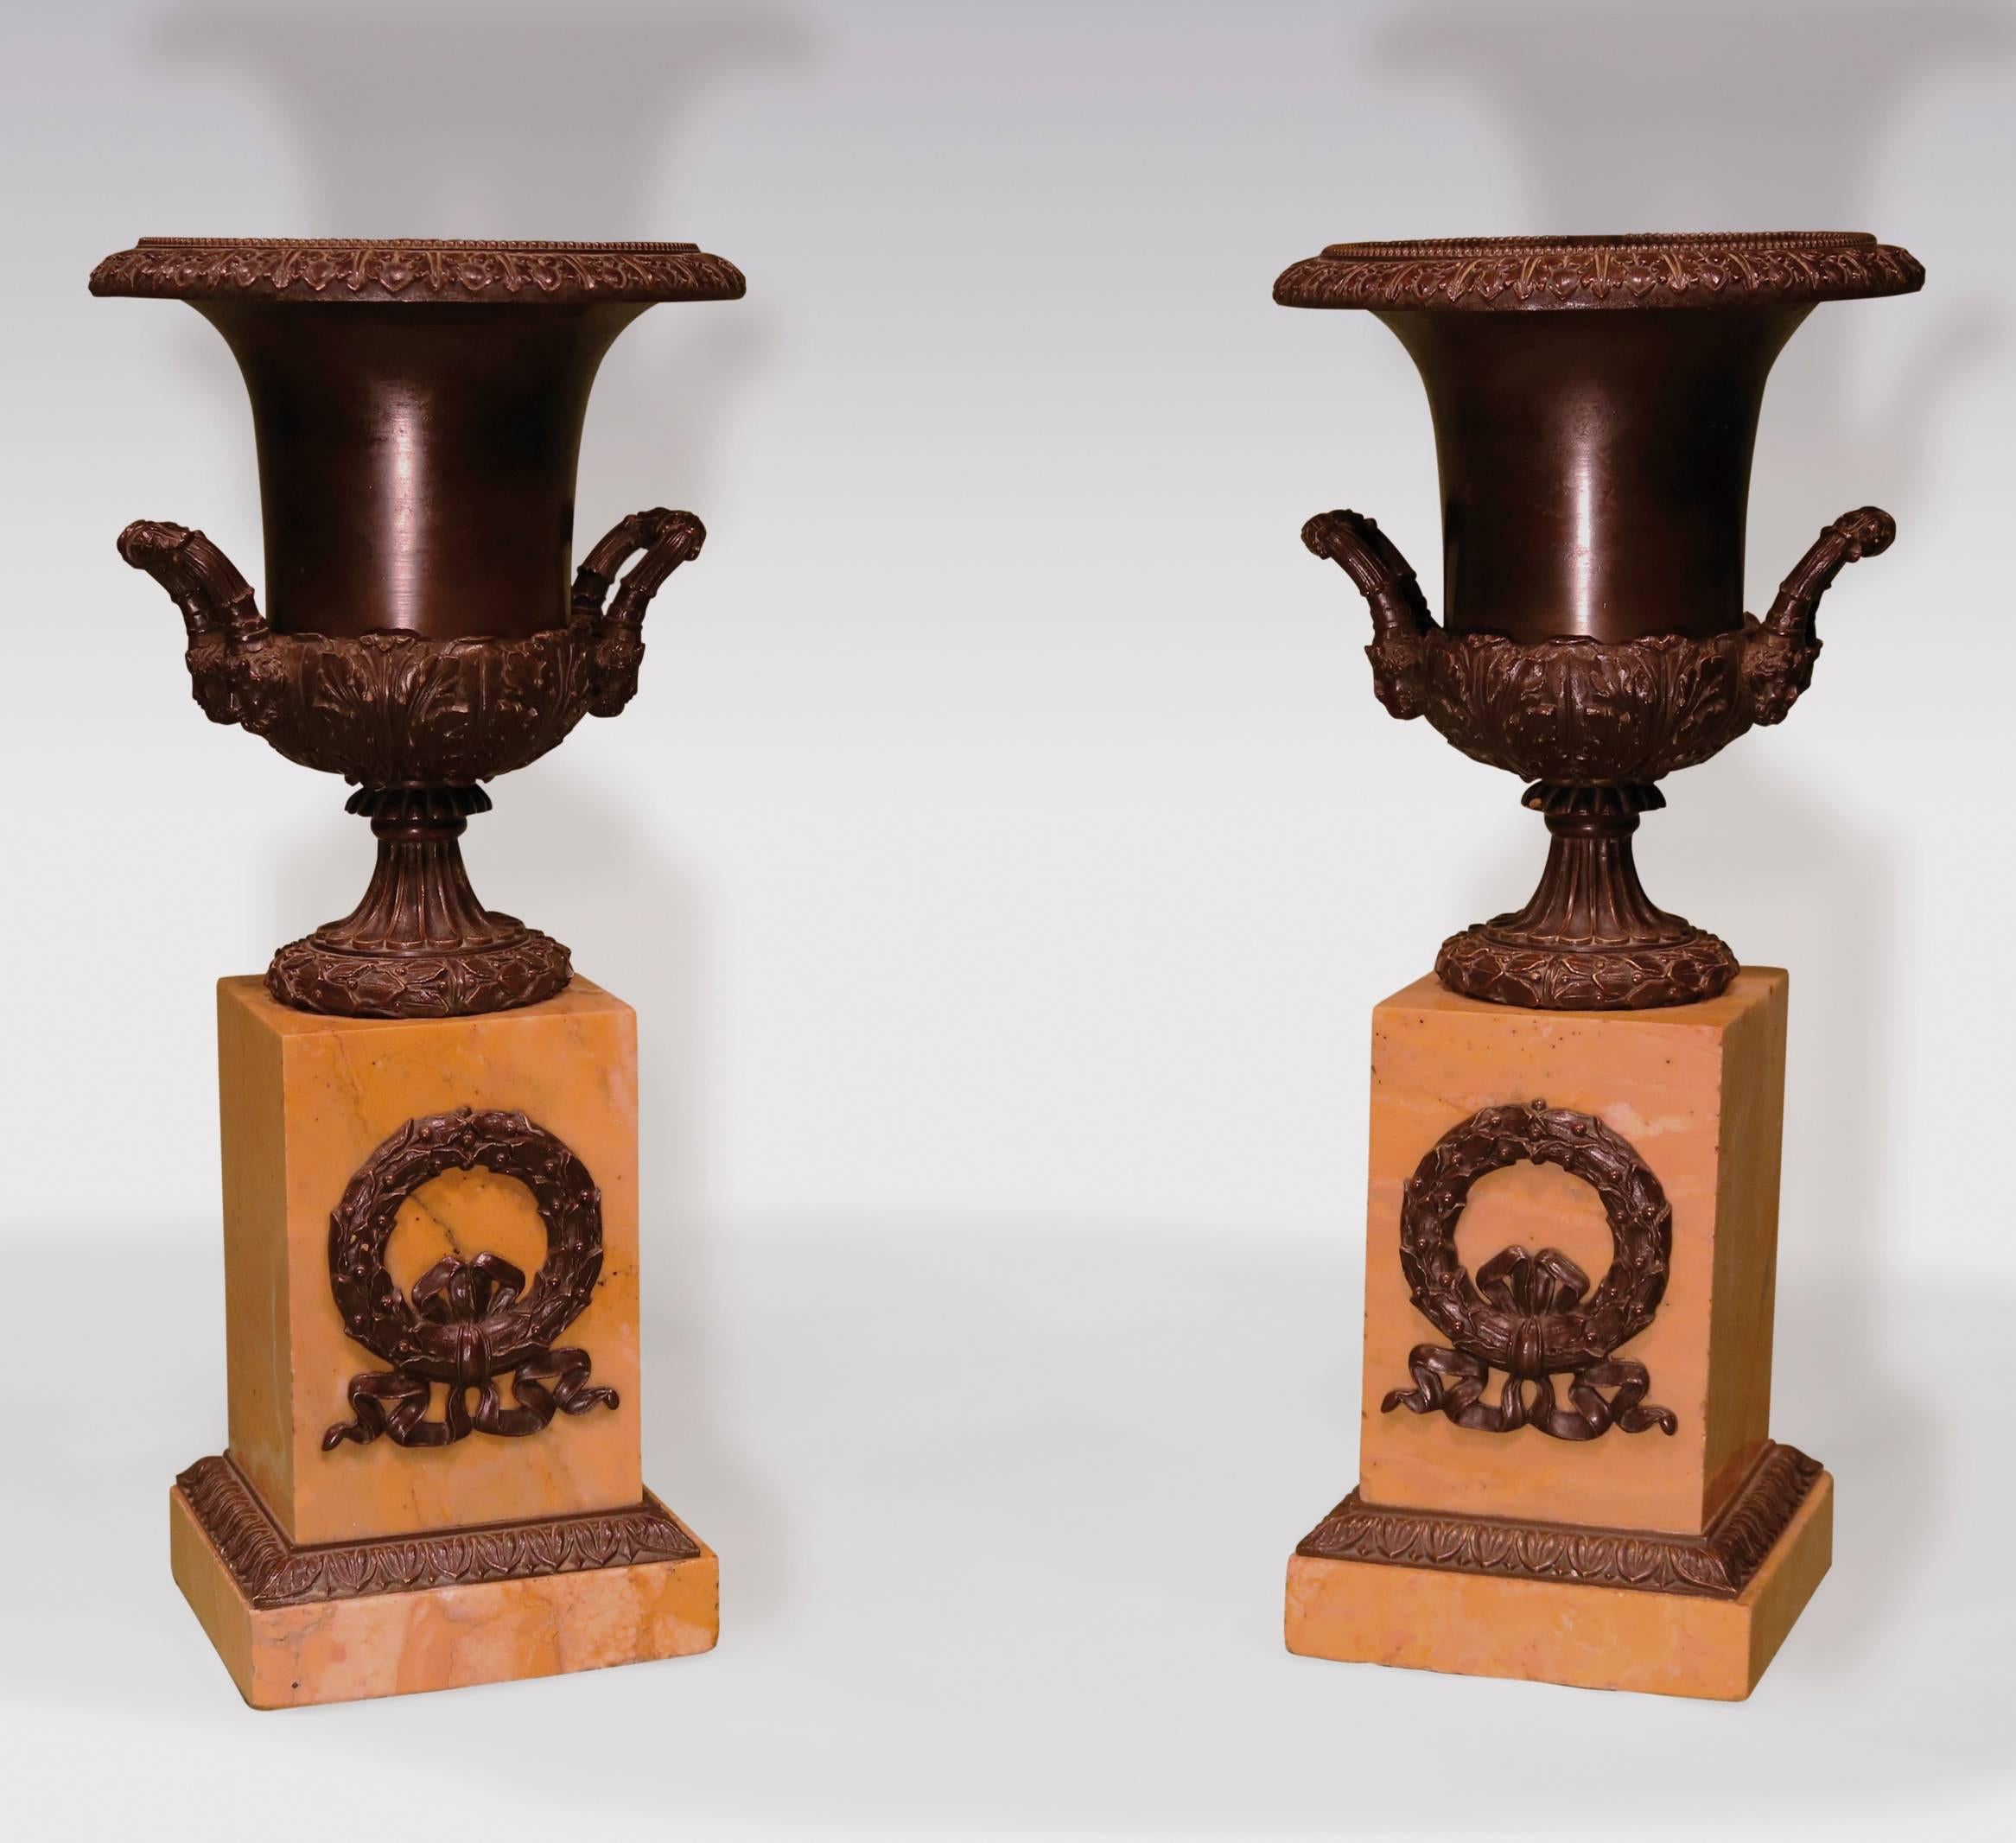 A pair of early 19th century bronze campana-shaped urns, having leaf and berry beaded rims, above scrolled satyr mask handles, raised on fluted stems, supported on sienna marble plinth bases, with ribbon-tied wreath appliqués. (Now converted to